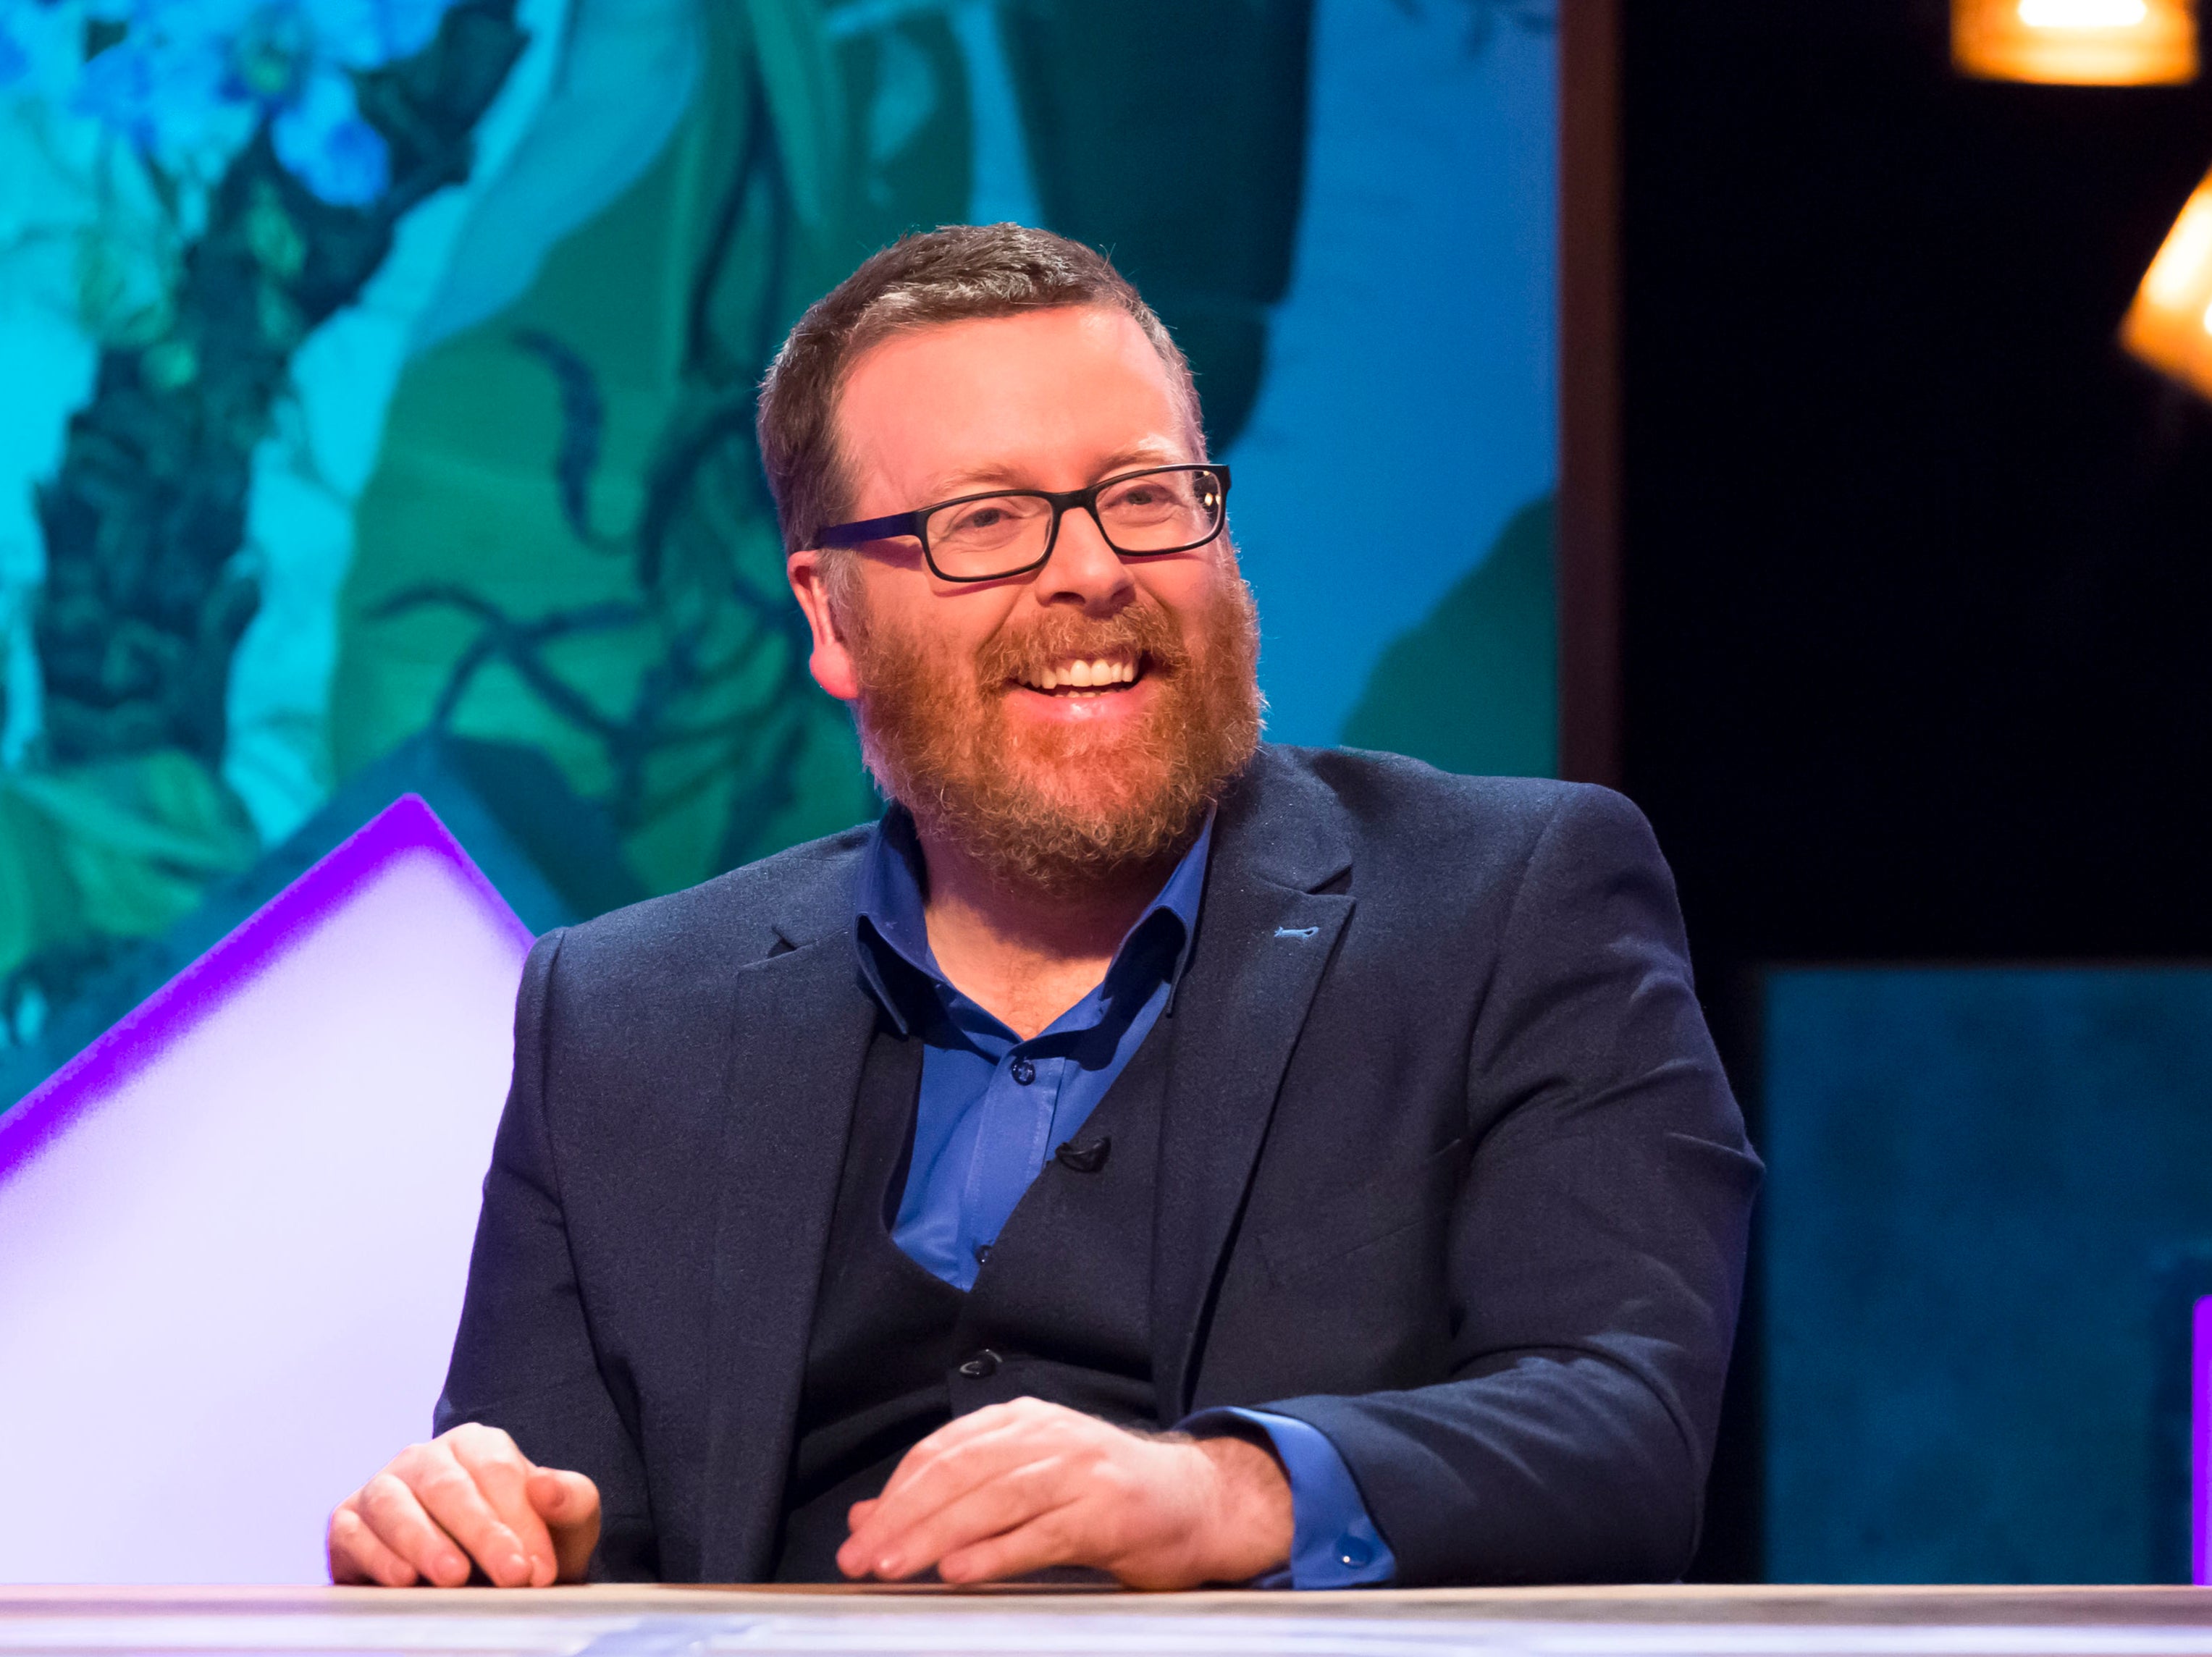 Boyle stars in the comedy series ‘Frankie Boyle’s New World Order’ for the BBC